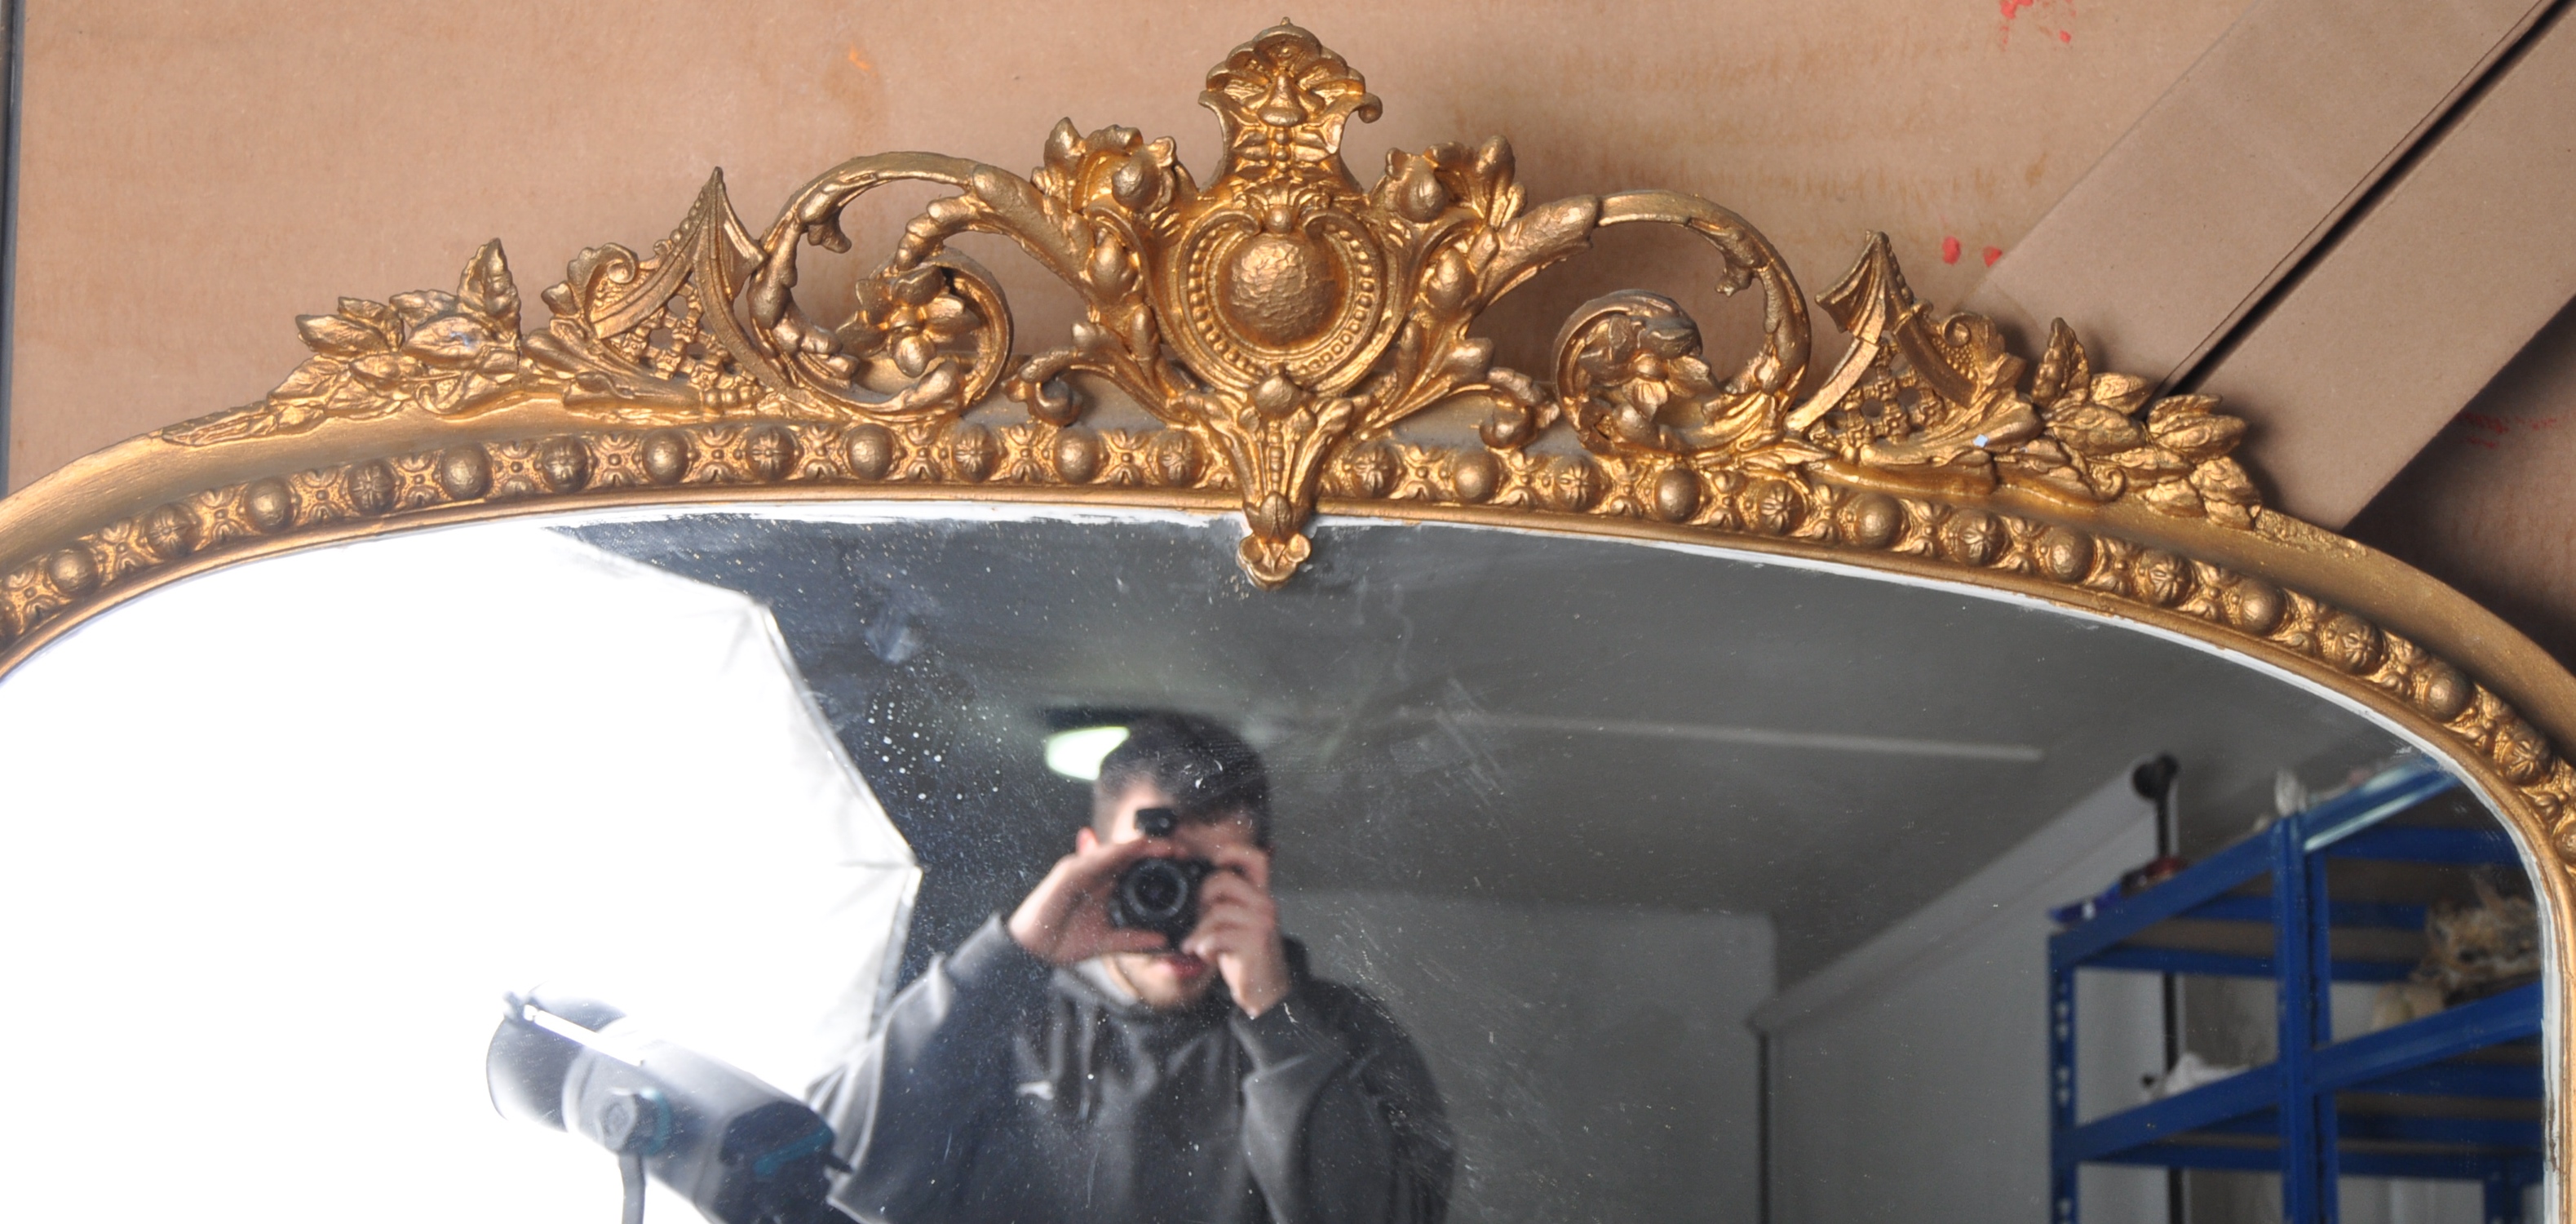 LARGE 19TH CENTURY VICTORIAN GILT WALL MIRROR - Image 3 of 8